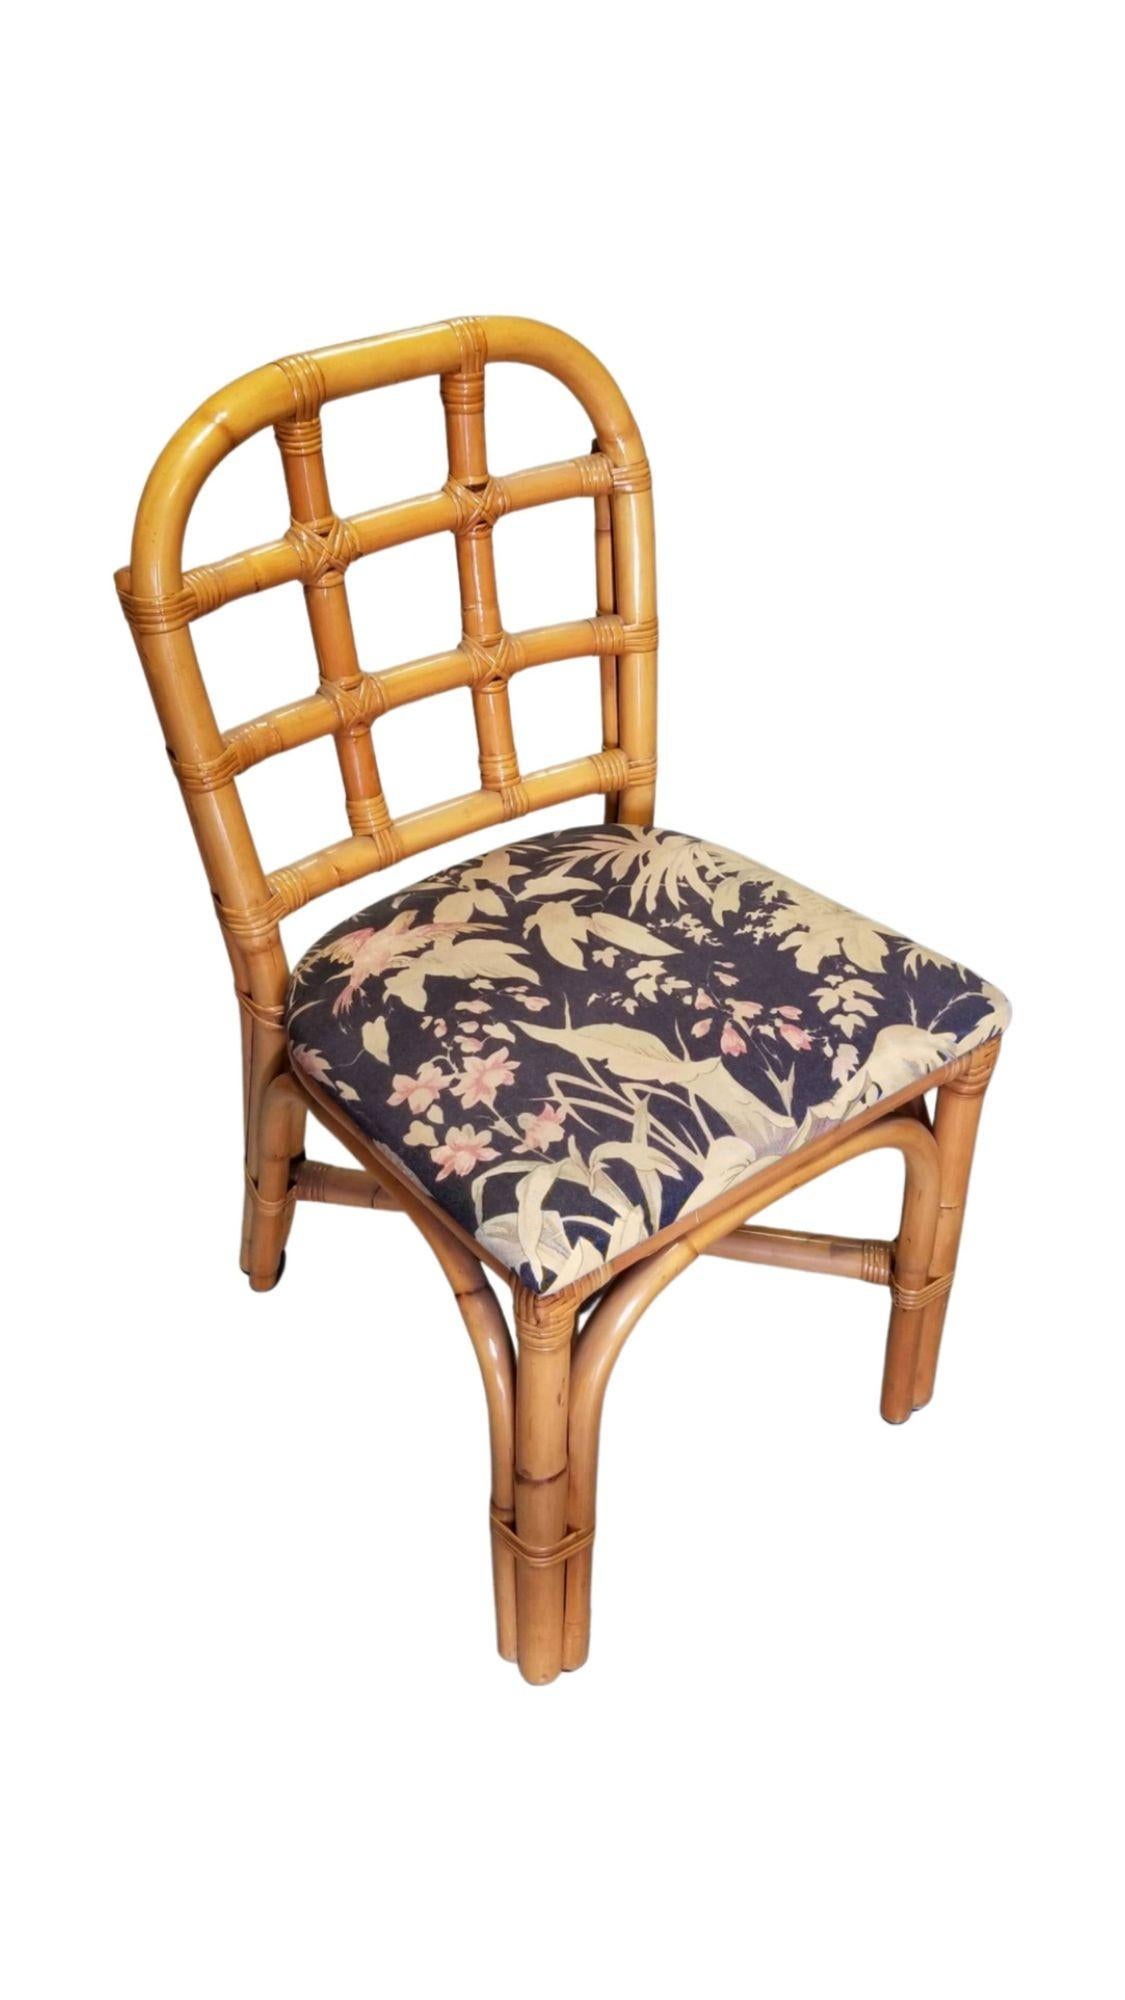 Restored rattan dining side chairs with Tic-Tac-Toe grid back and vintage tropical floral seat.

1950, United States

We only purchase and sell only the best and finest rattan furniture made by the best and most well-known American designers and